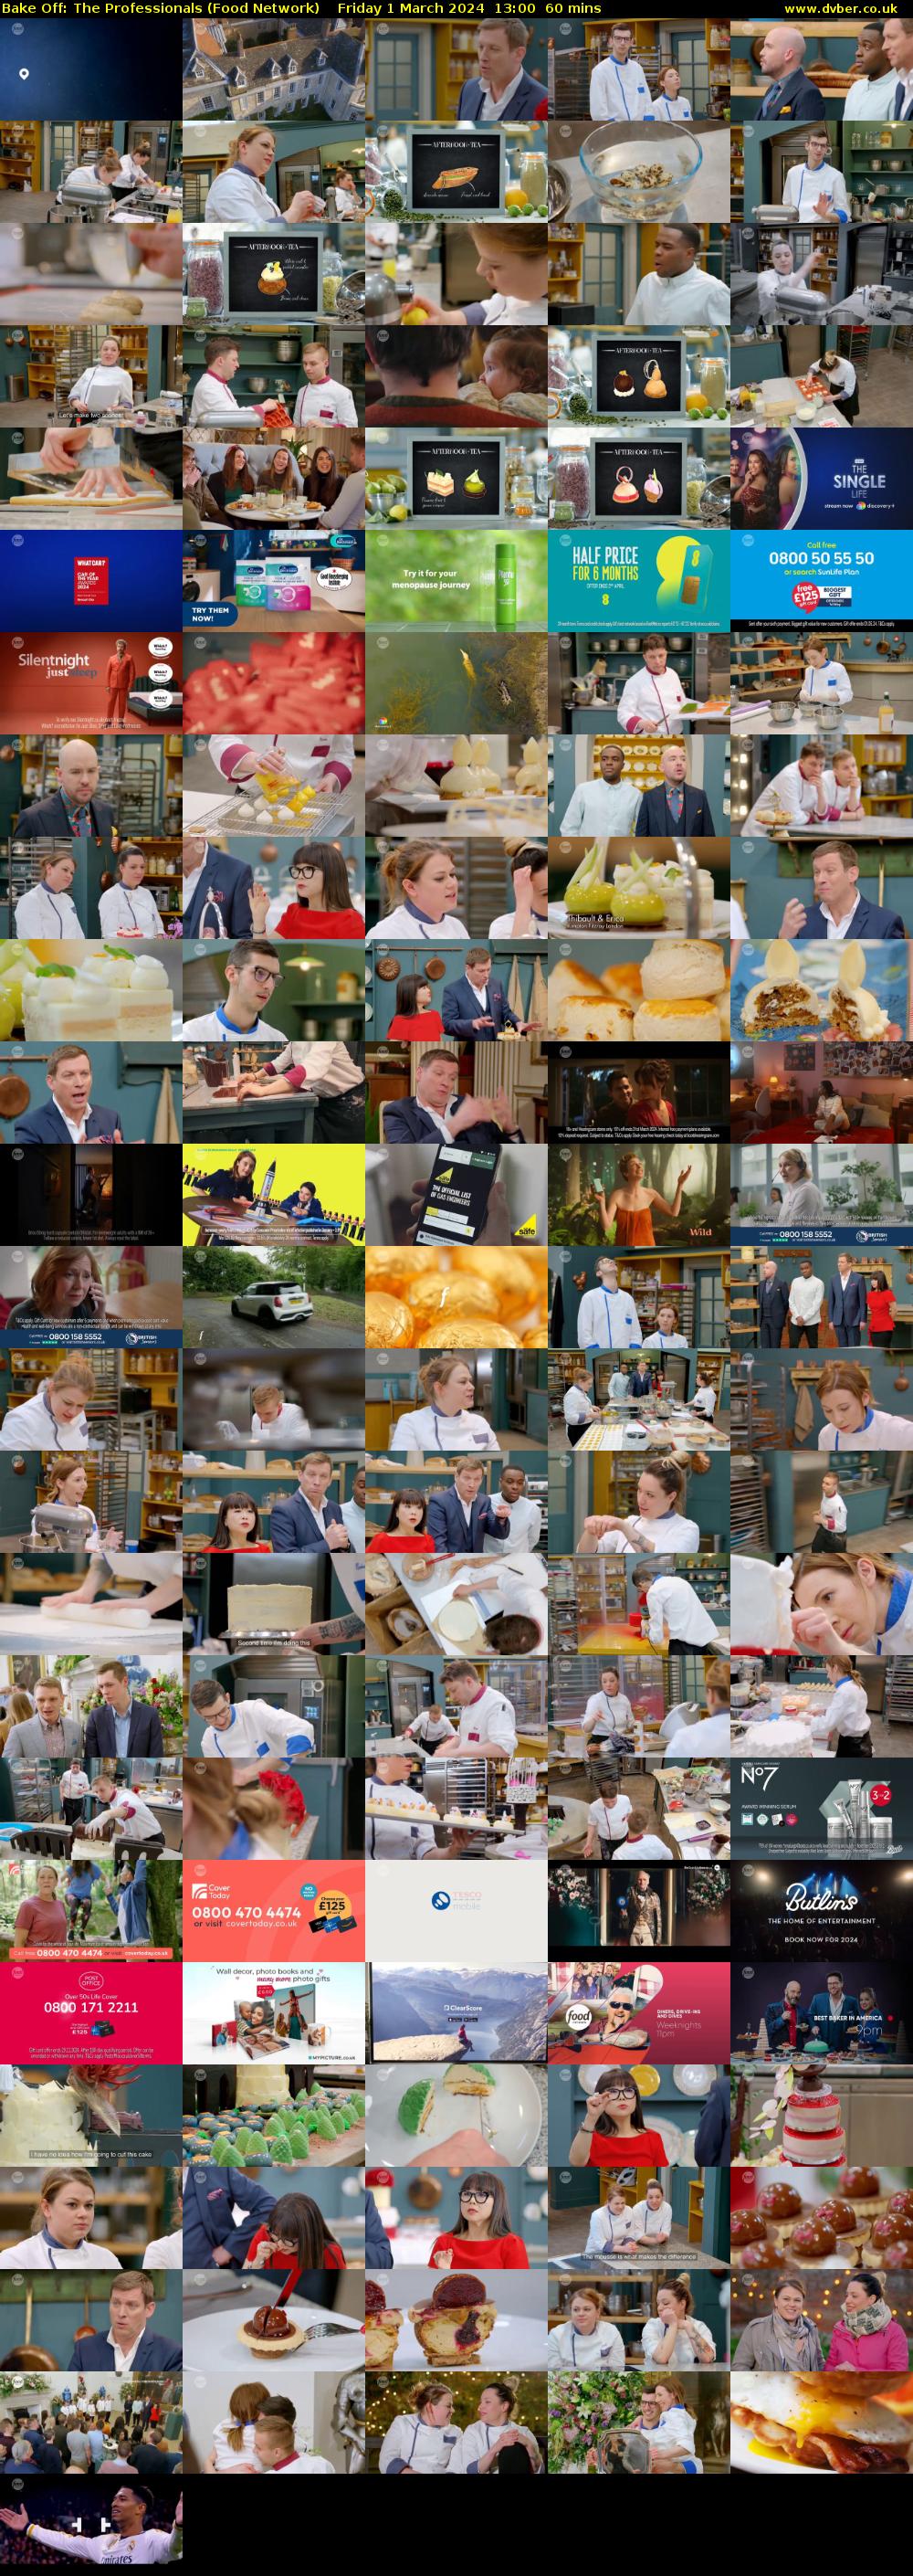 Bake Off: The Professionals (Food Network) Friday 1 March 2024 13:00 - 14:00